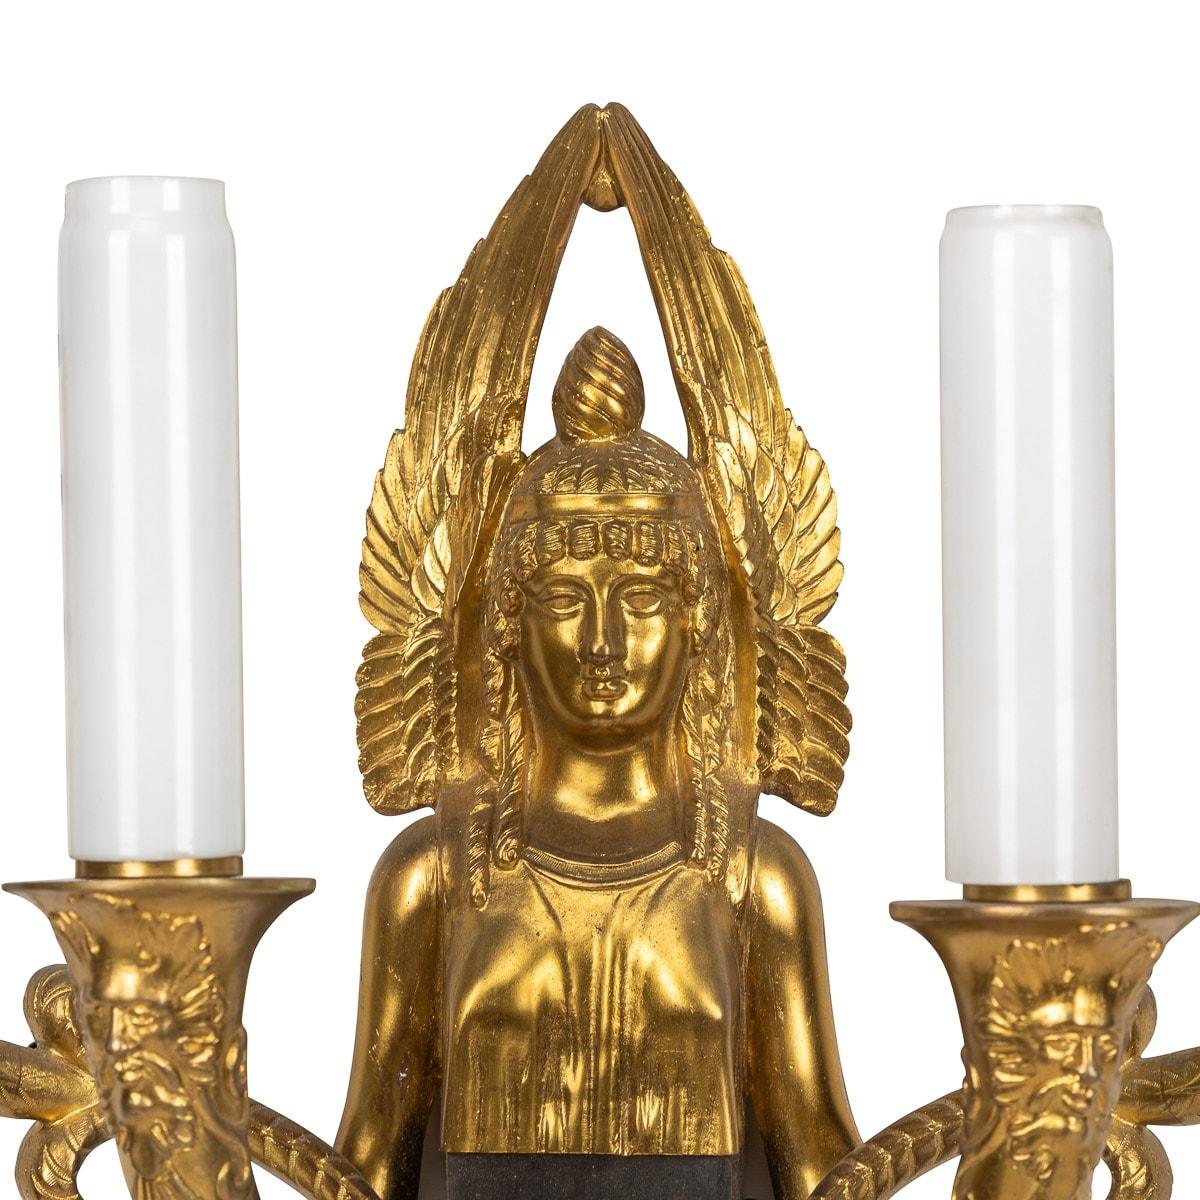 19th Century French Egyptian Revival Part Ormolu D'appliques Wall Lights, c 1830 For Sale 1